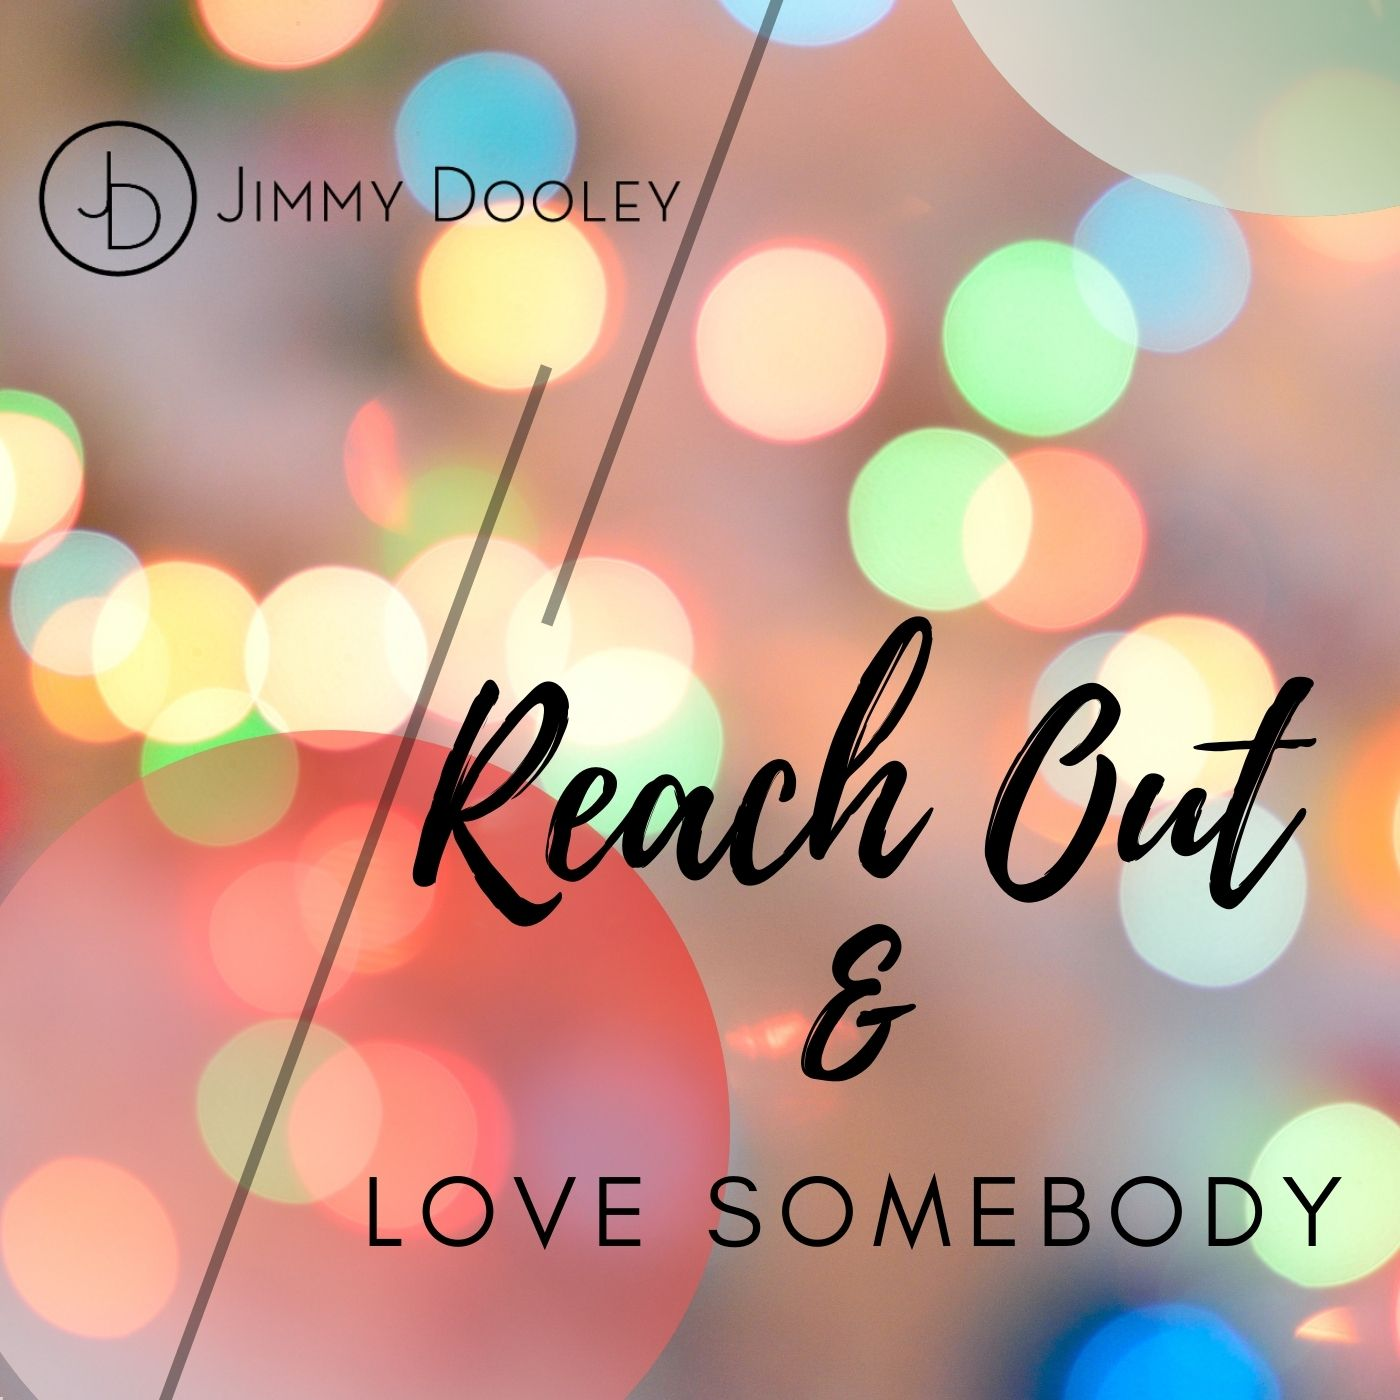 Reach Out & Love Somebody - Jimmy Dooley